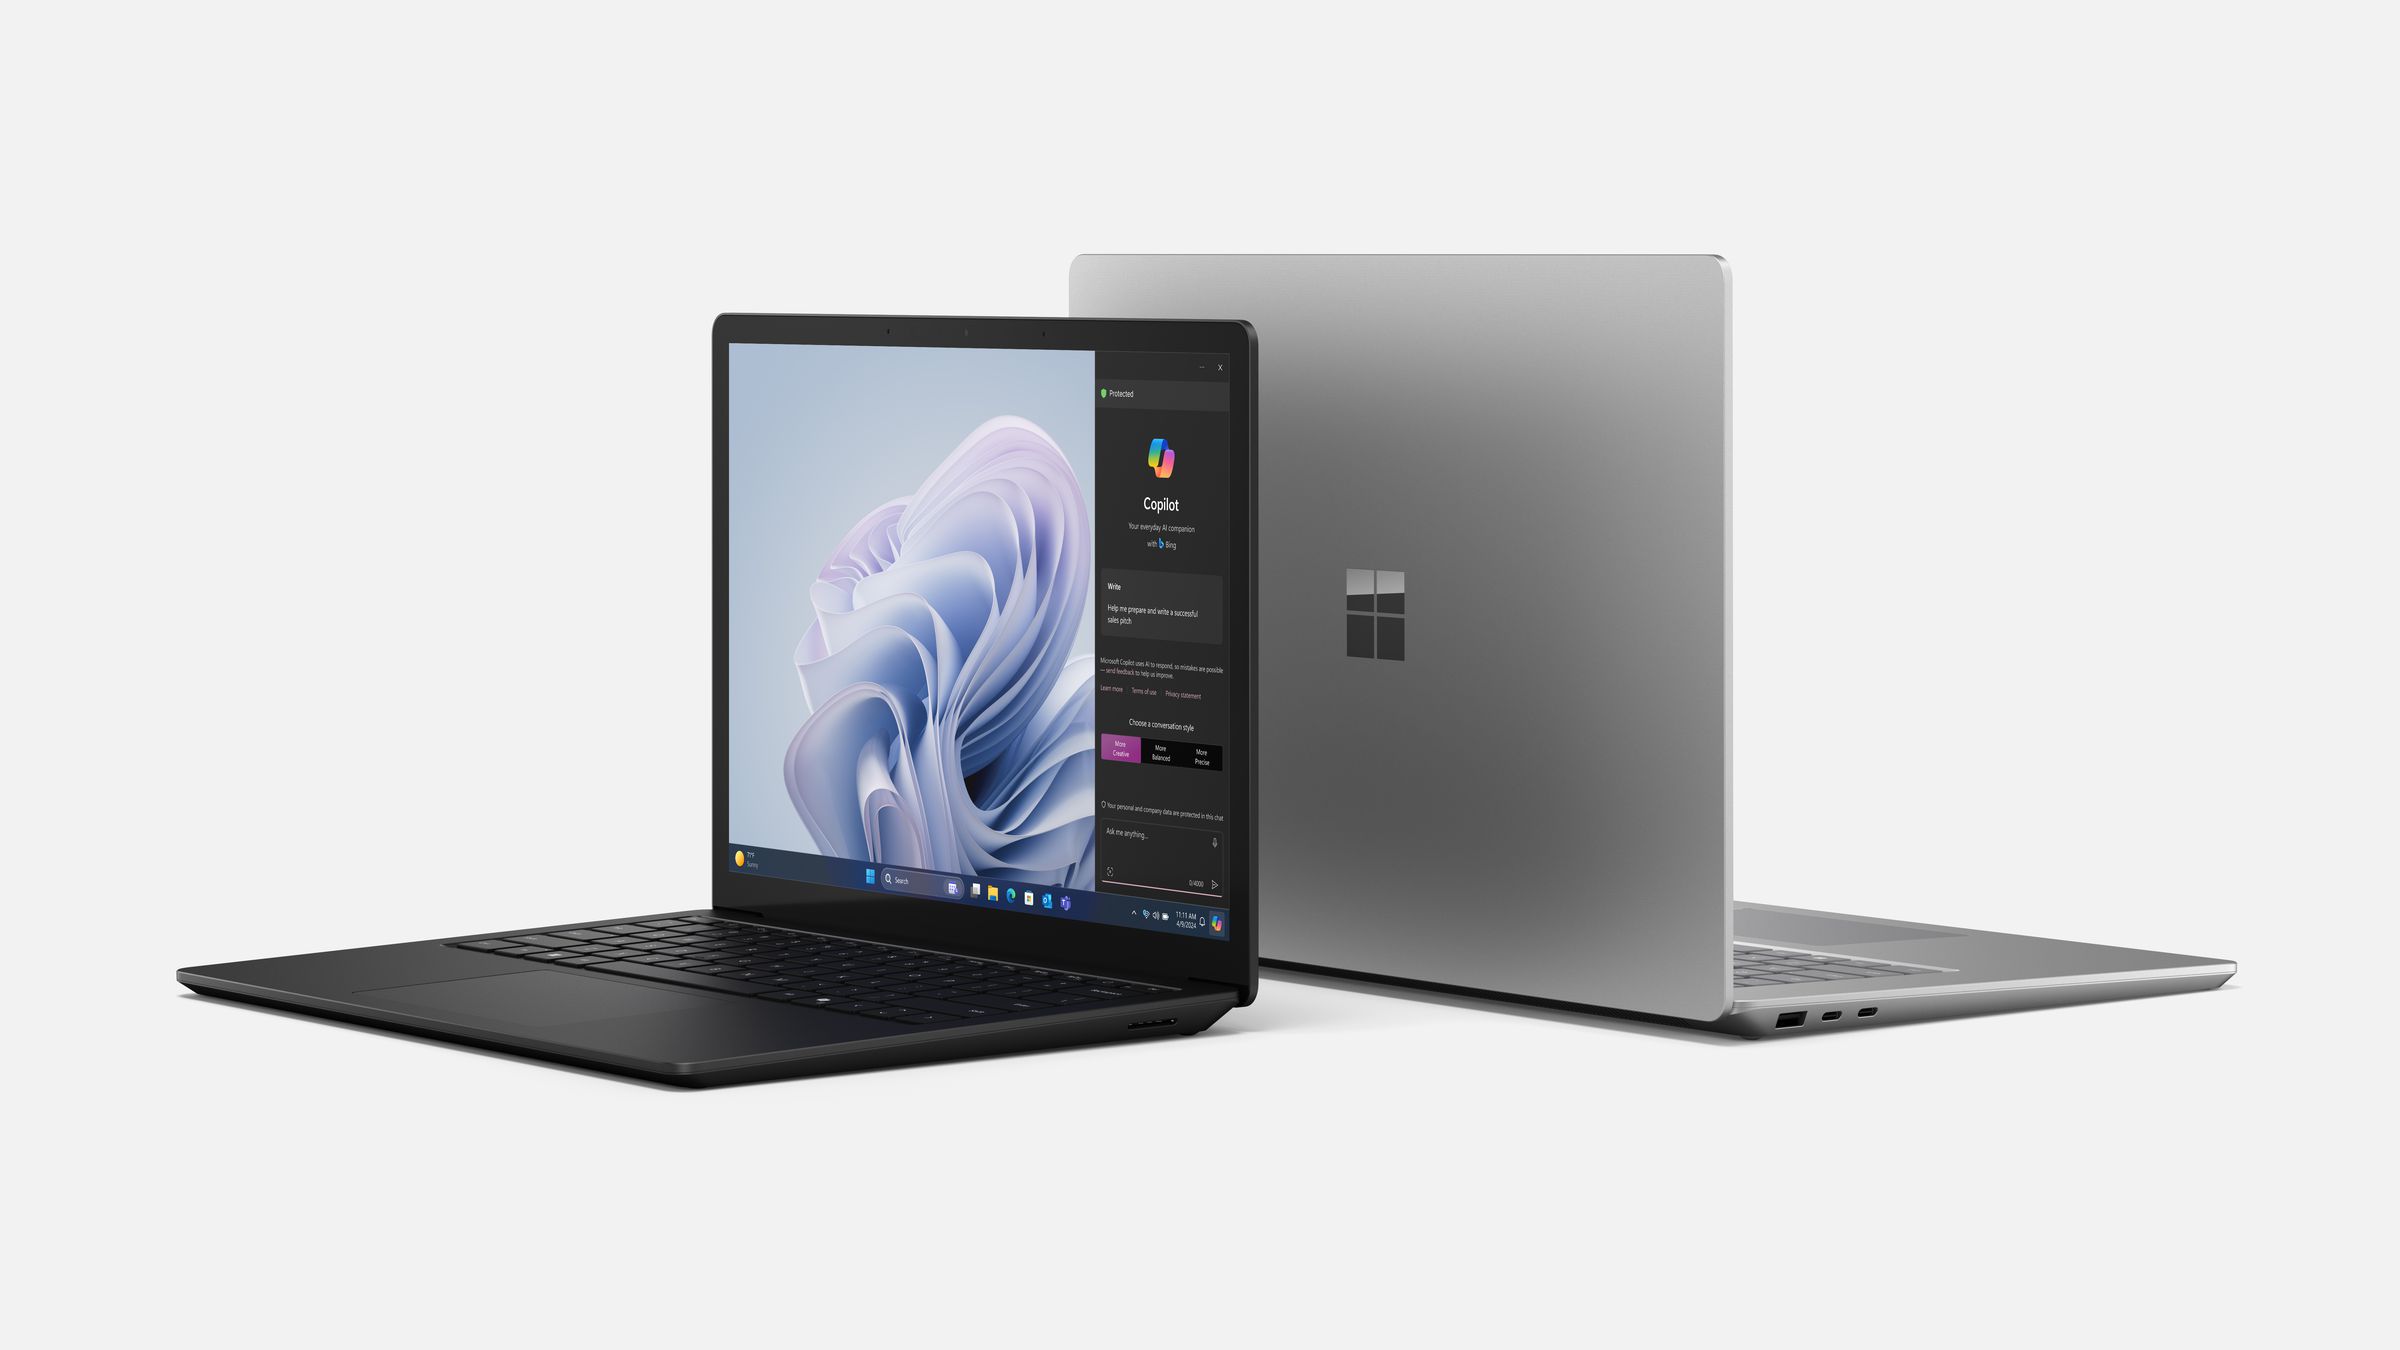 Only the larger Surface Laptop 6 will get two USB-C ports.